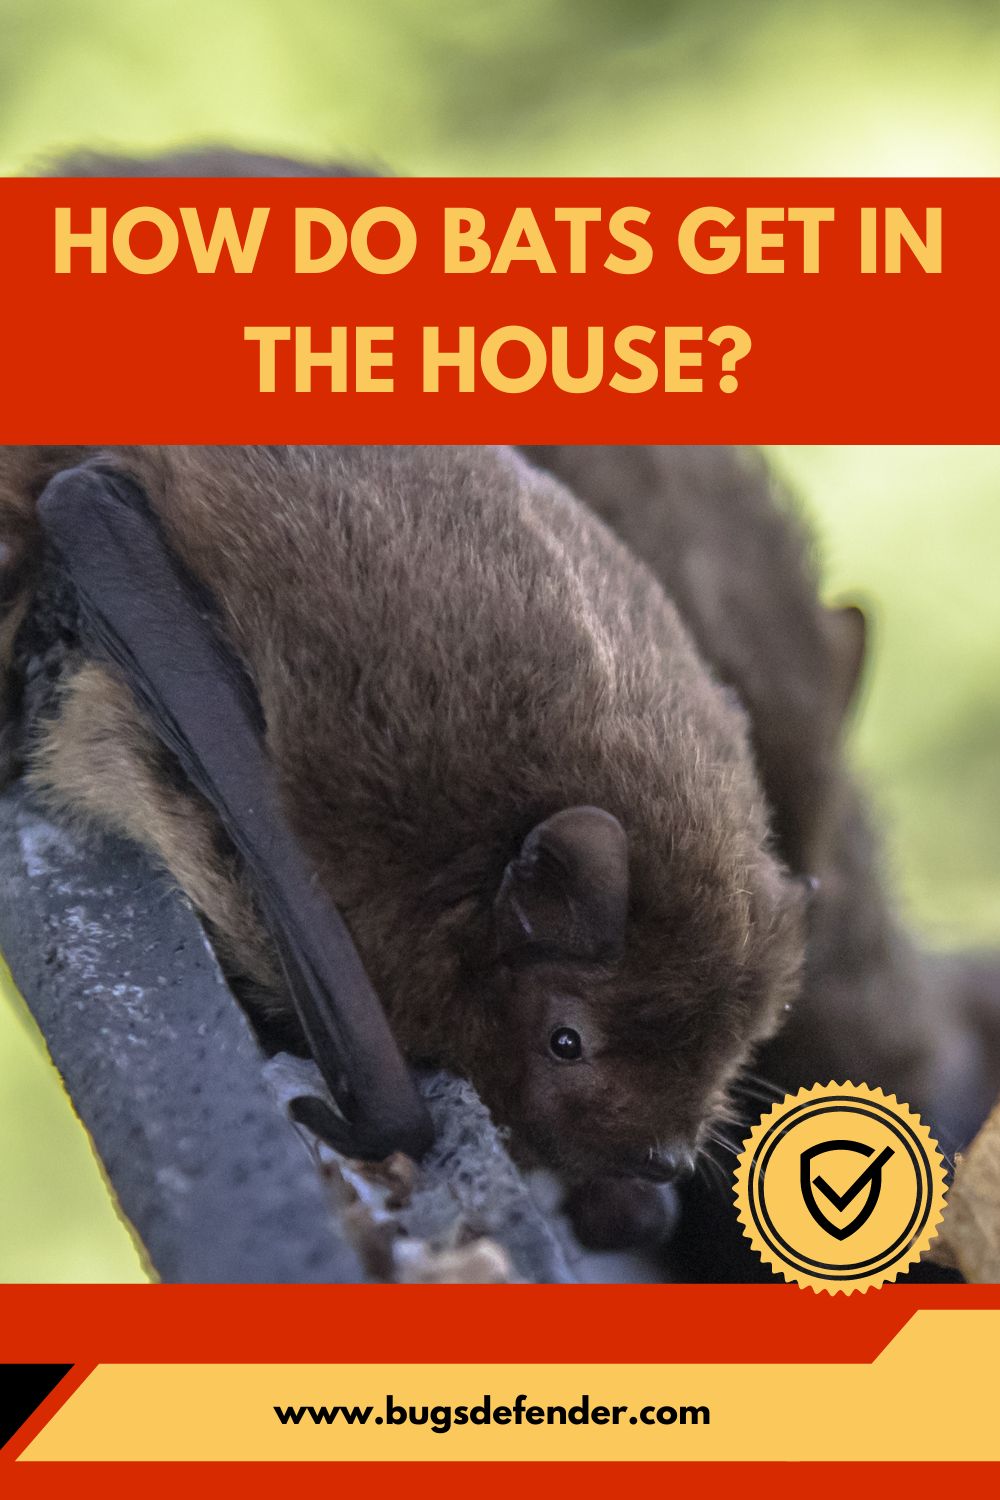 How Do Bats Get in the House? pin1